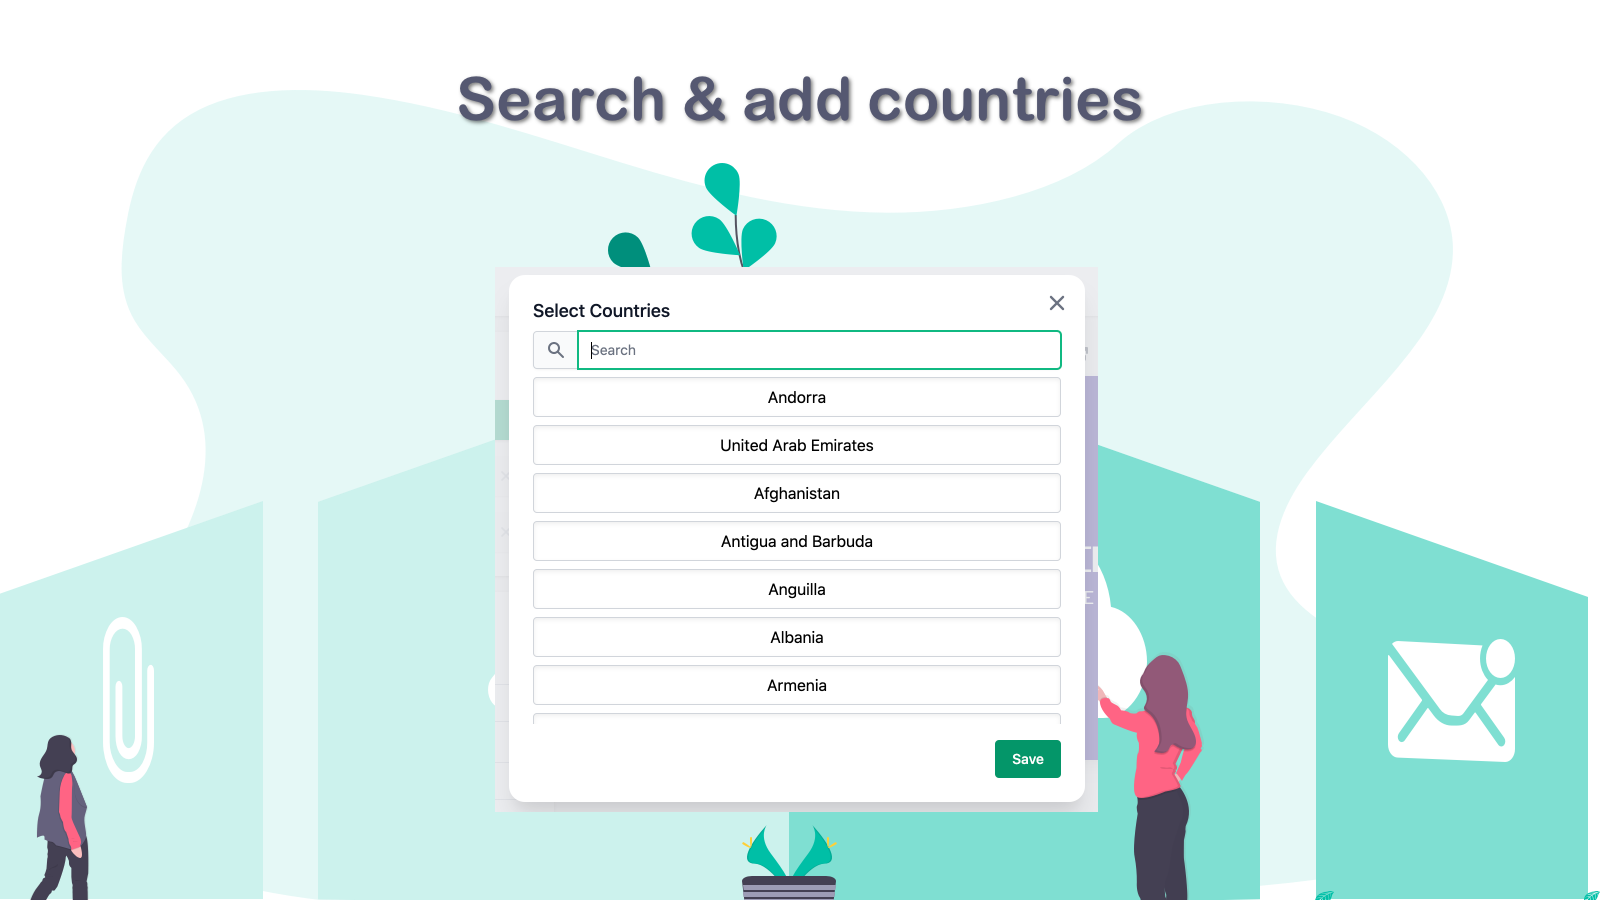 Search & add countries